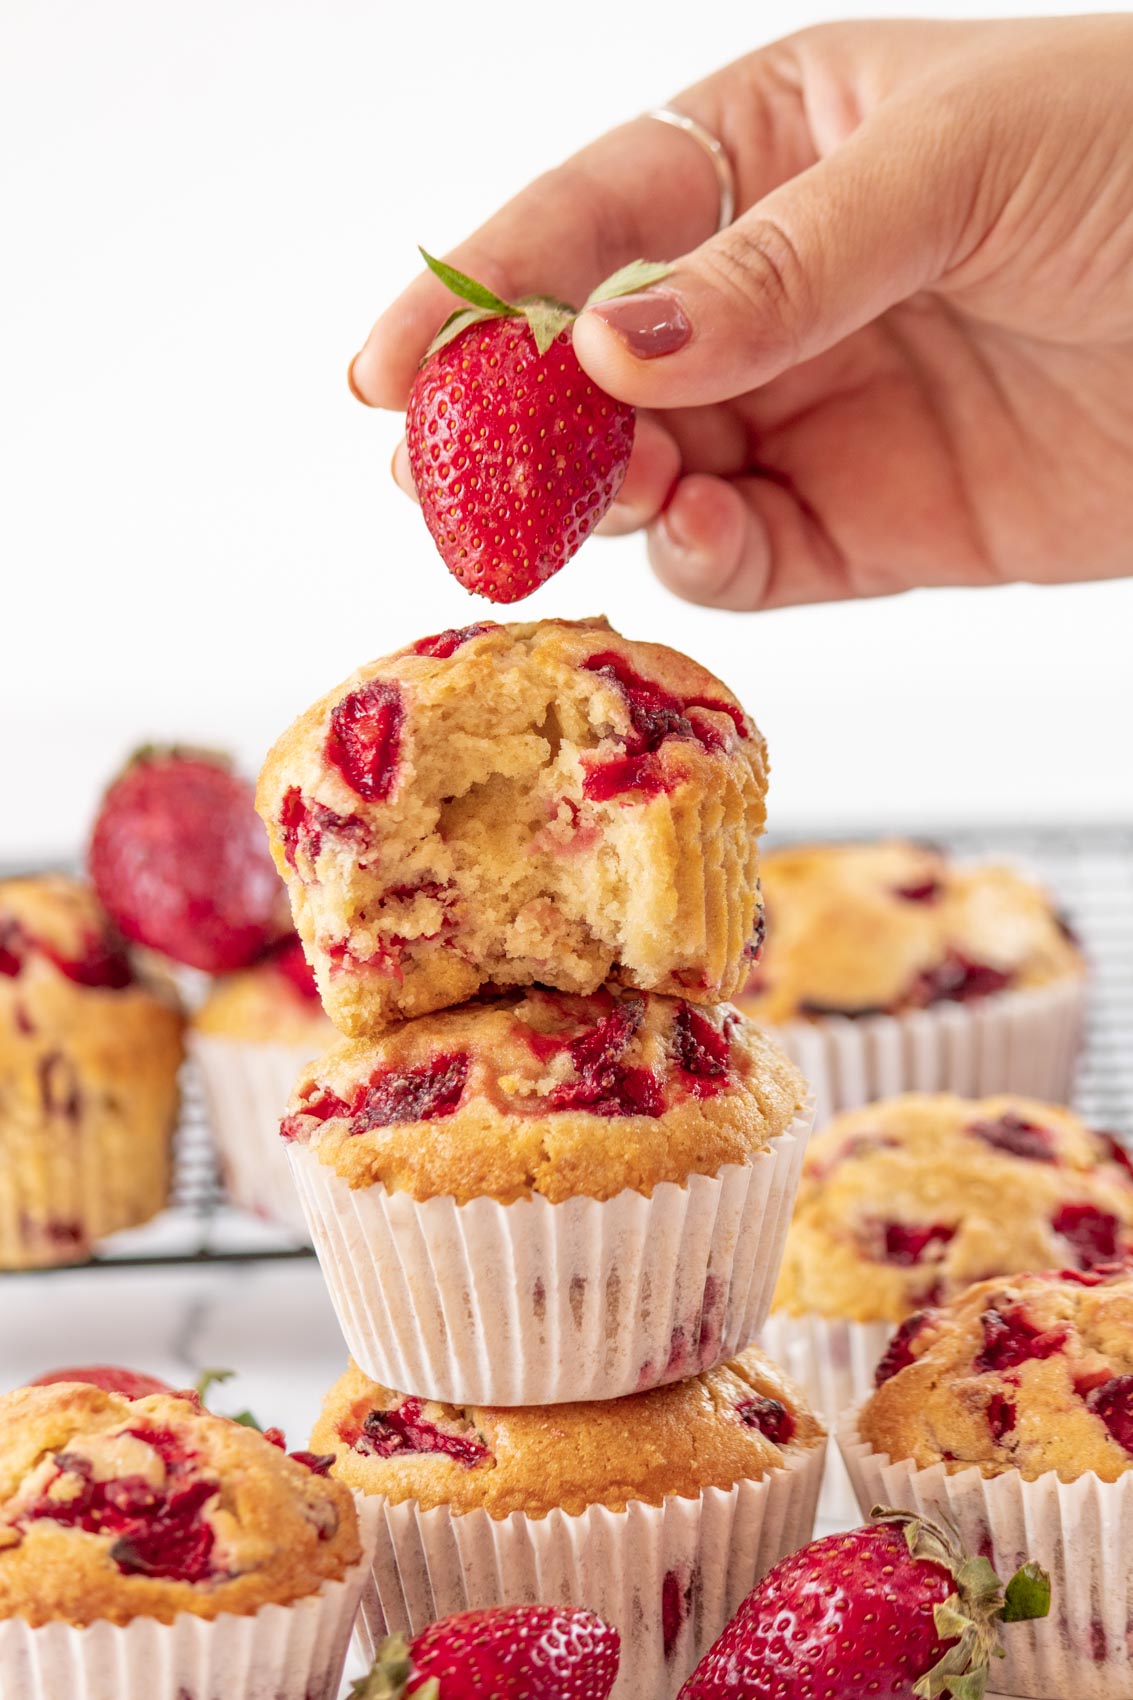 hand lifting a fresh strawberry next to a pile of strawberry muffins